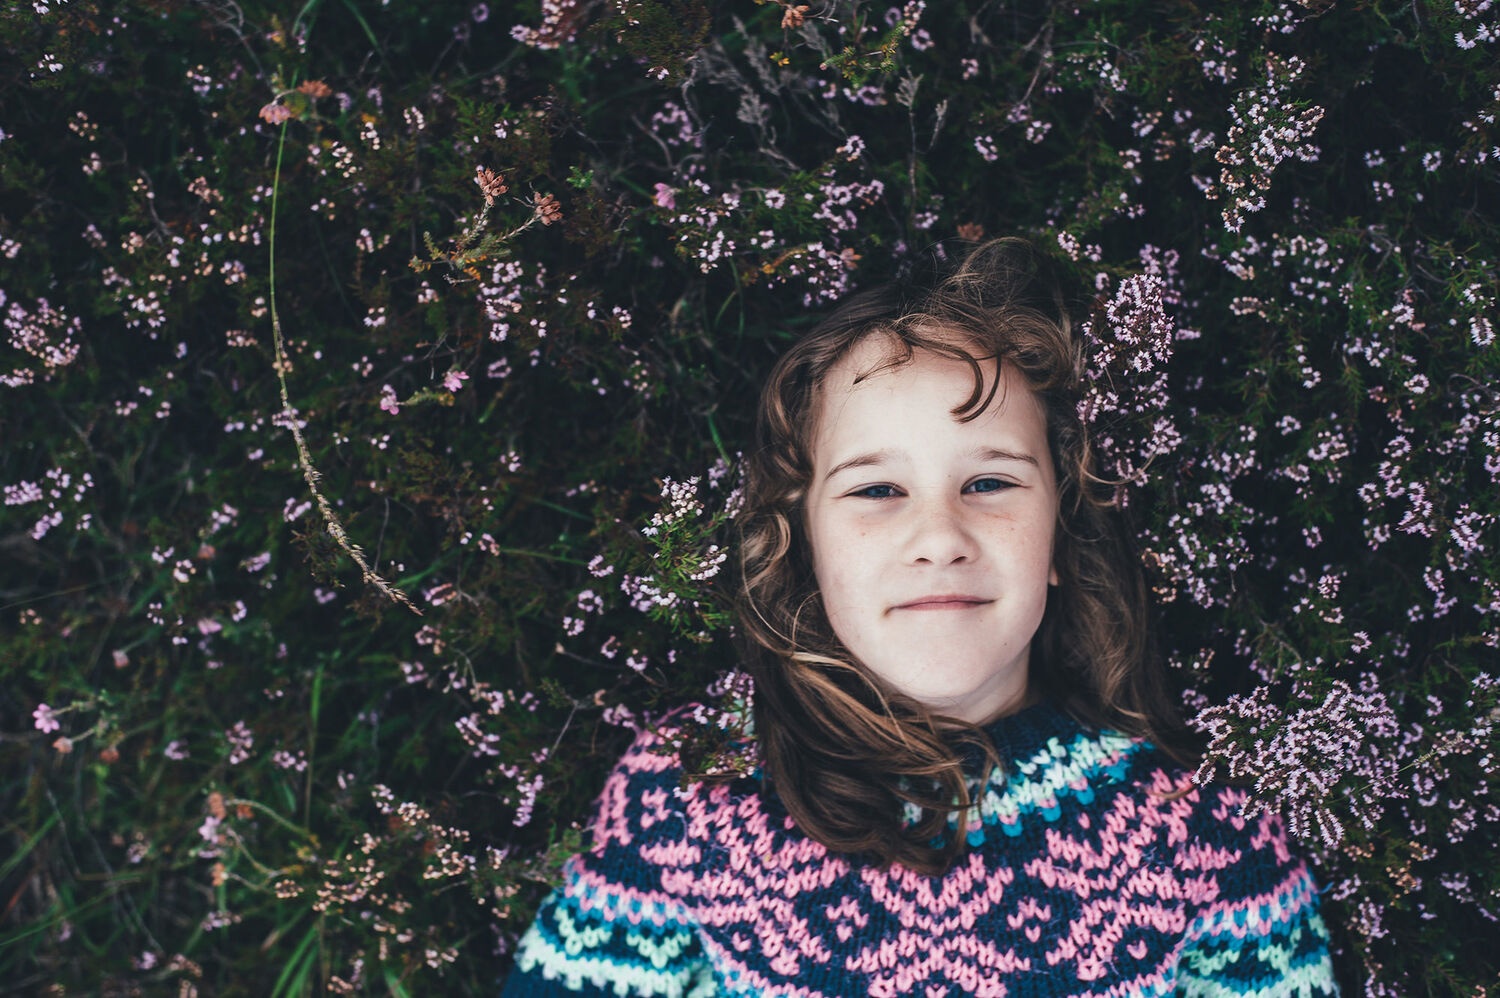 girl in colourful woollen jumper leaning against hedge with flowers